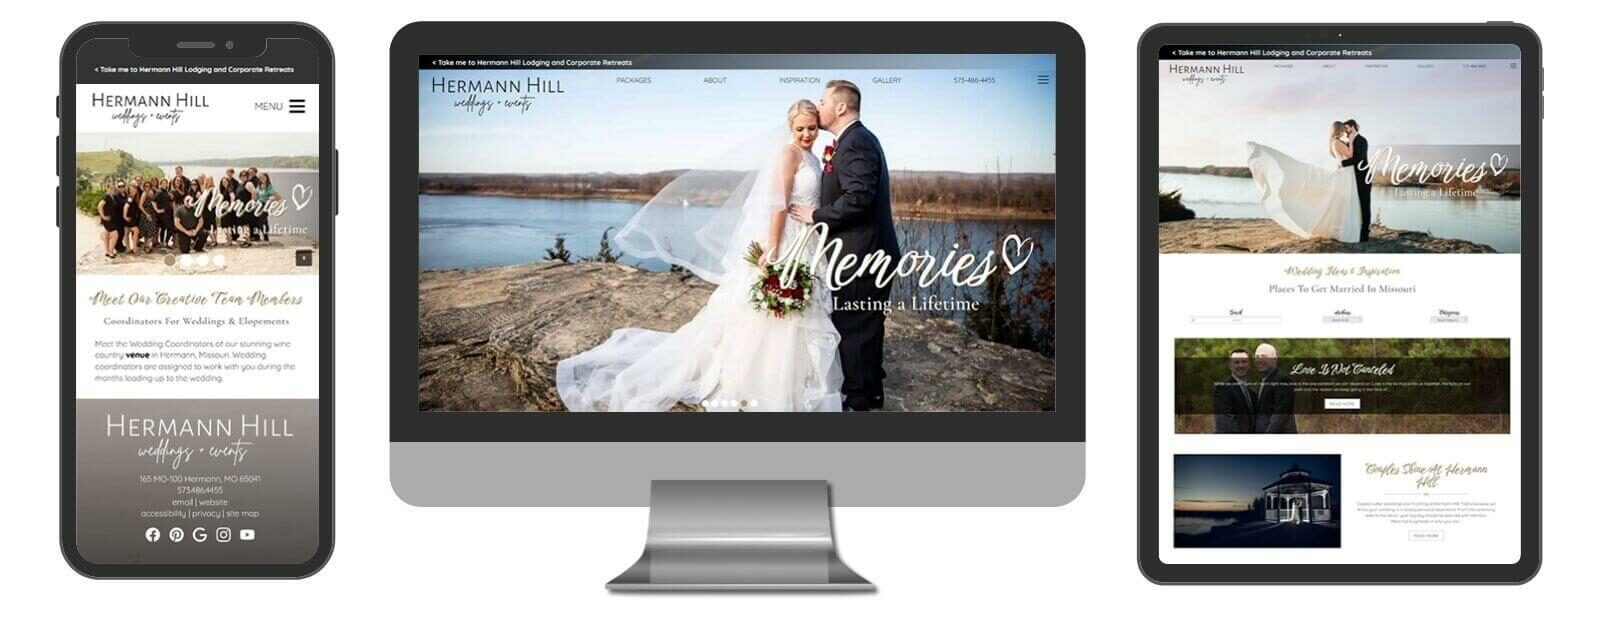 Screenshot of Desktop, Mobile and tablet views of the website for Hermann Hill Weddings